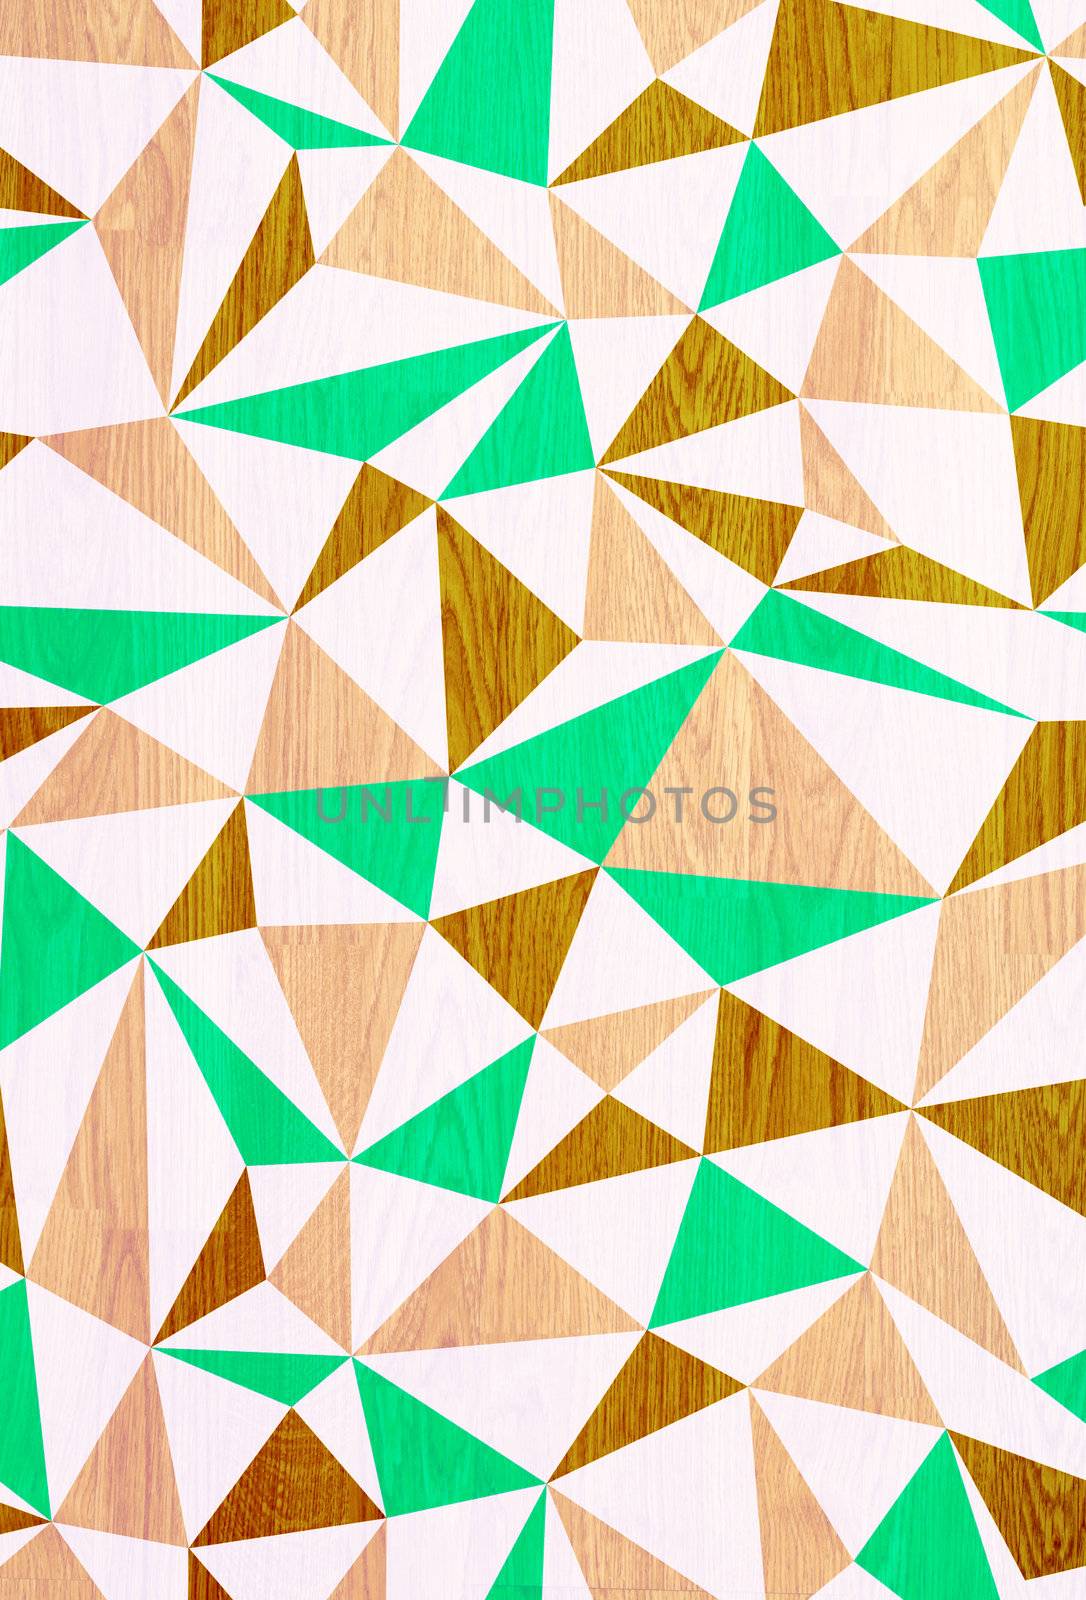 Illustration of triangle wooden pattern   by nuchylee